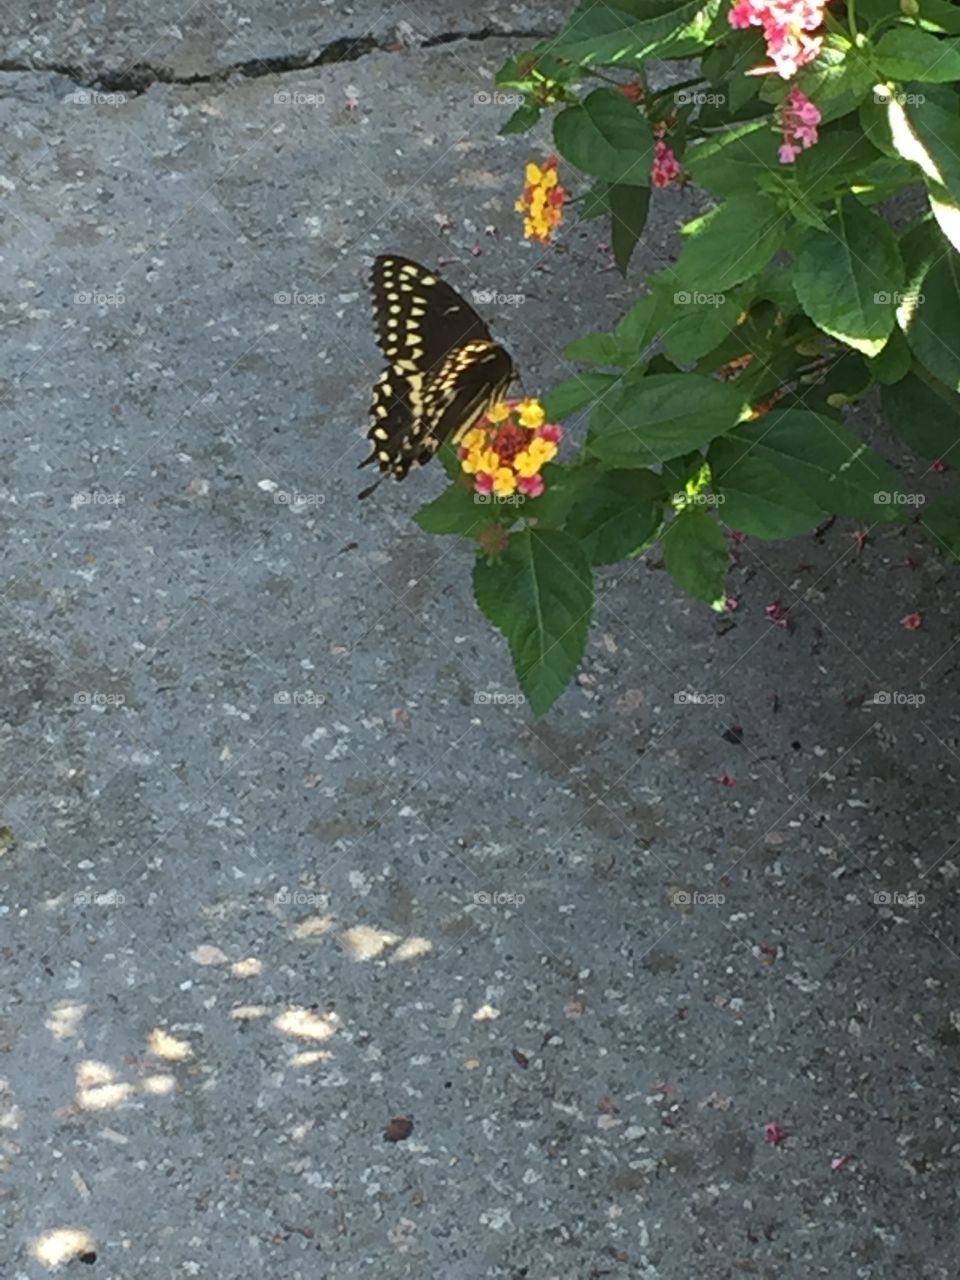 Butterfly at work.